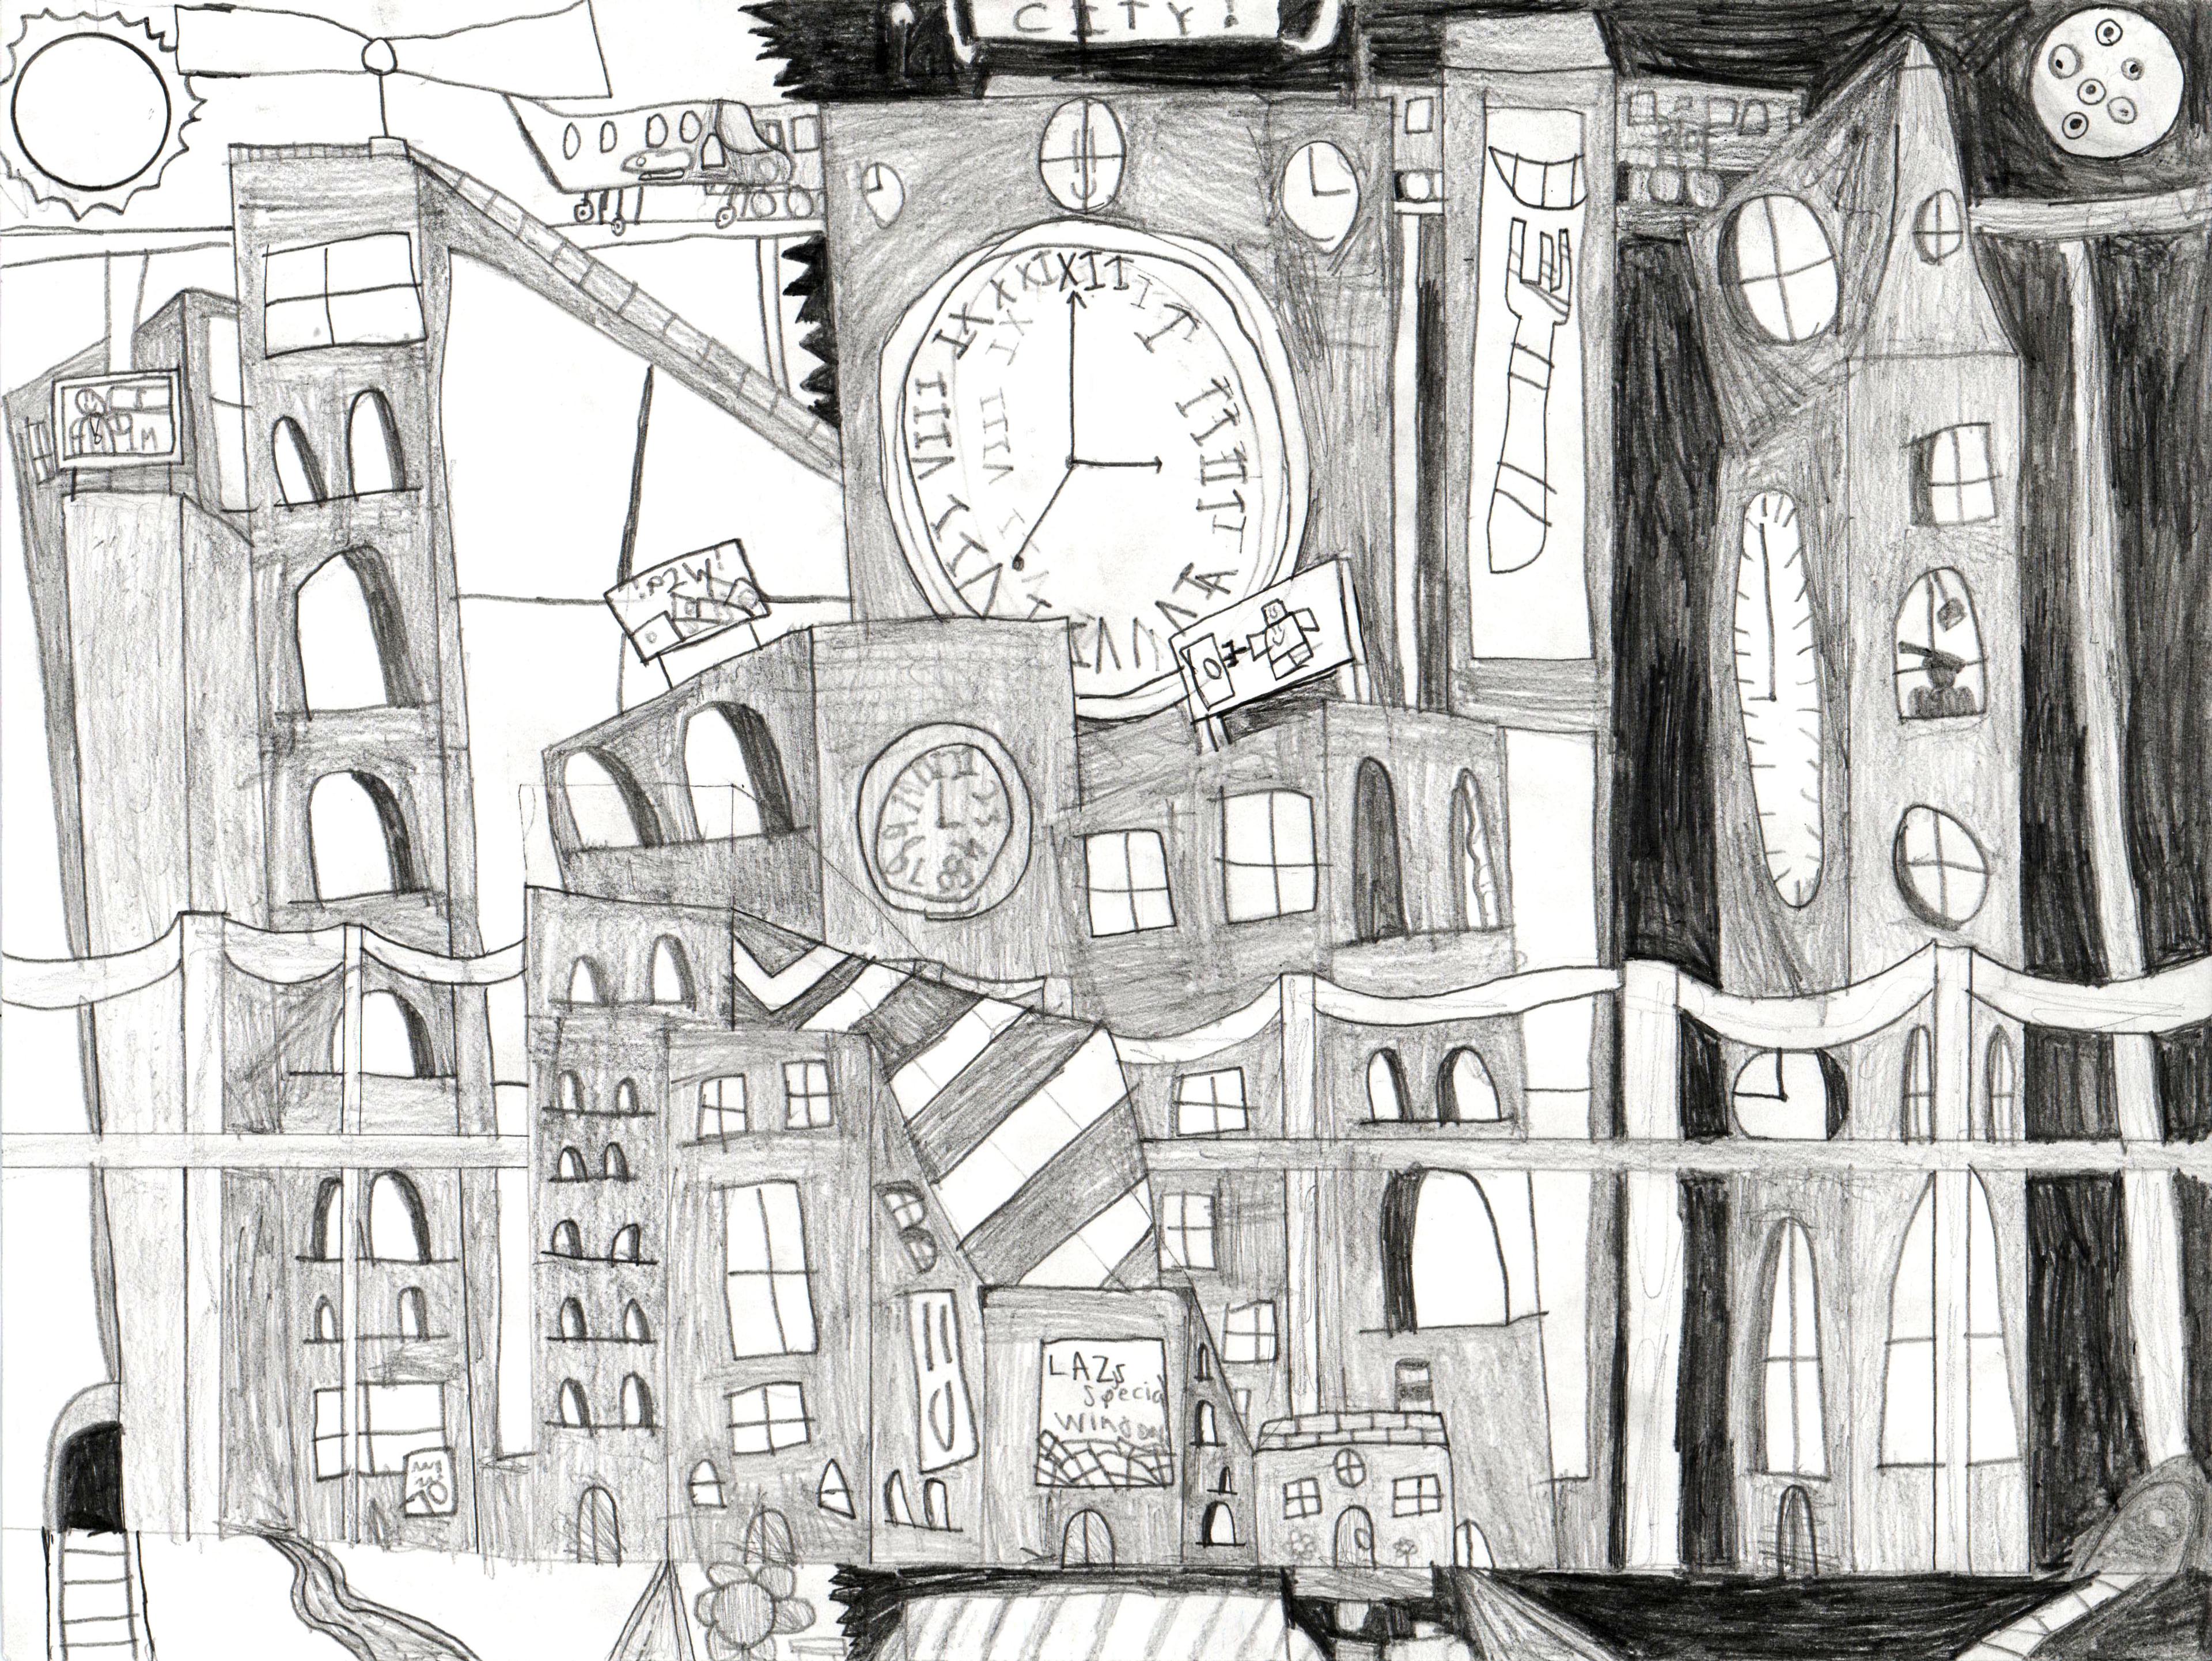 Black, white, and gray pencil drawing of an urban scene of tall buildings. A large, prominent clock sits high near the roof of a building in the center of the illustration, with smaller clocks shown on other buildings below and to the right. A train tunnel with emerging tracks is shown at the bottom left corner of the illustration. Billboards sit on rooftops of some of the tall buildings. The left side of the drawing is shown in daylight with a shining sun at the top left corner. The right side of the drawing is shown at night with a full moon at the top right corner. An elevated suspension bridge runs horizontally across the lower portion of the image, with another bridge drawn far above among the roofs of the tall buildings.